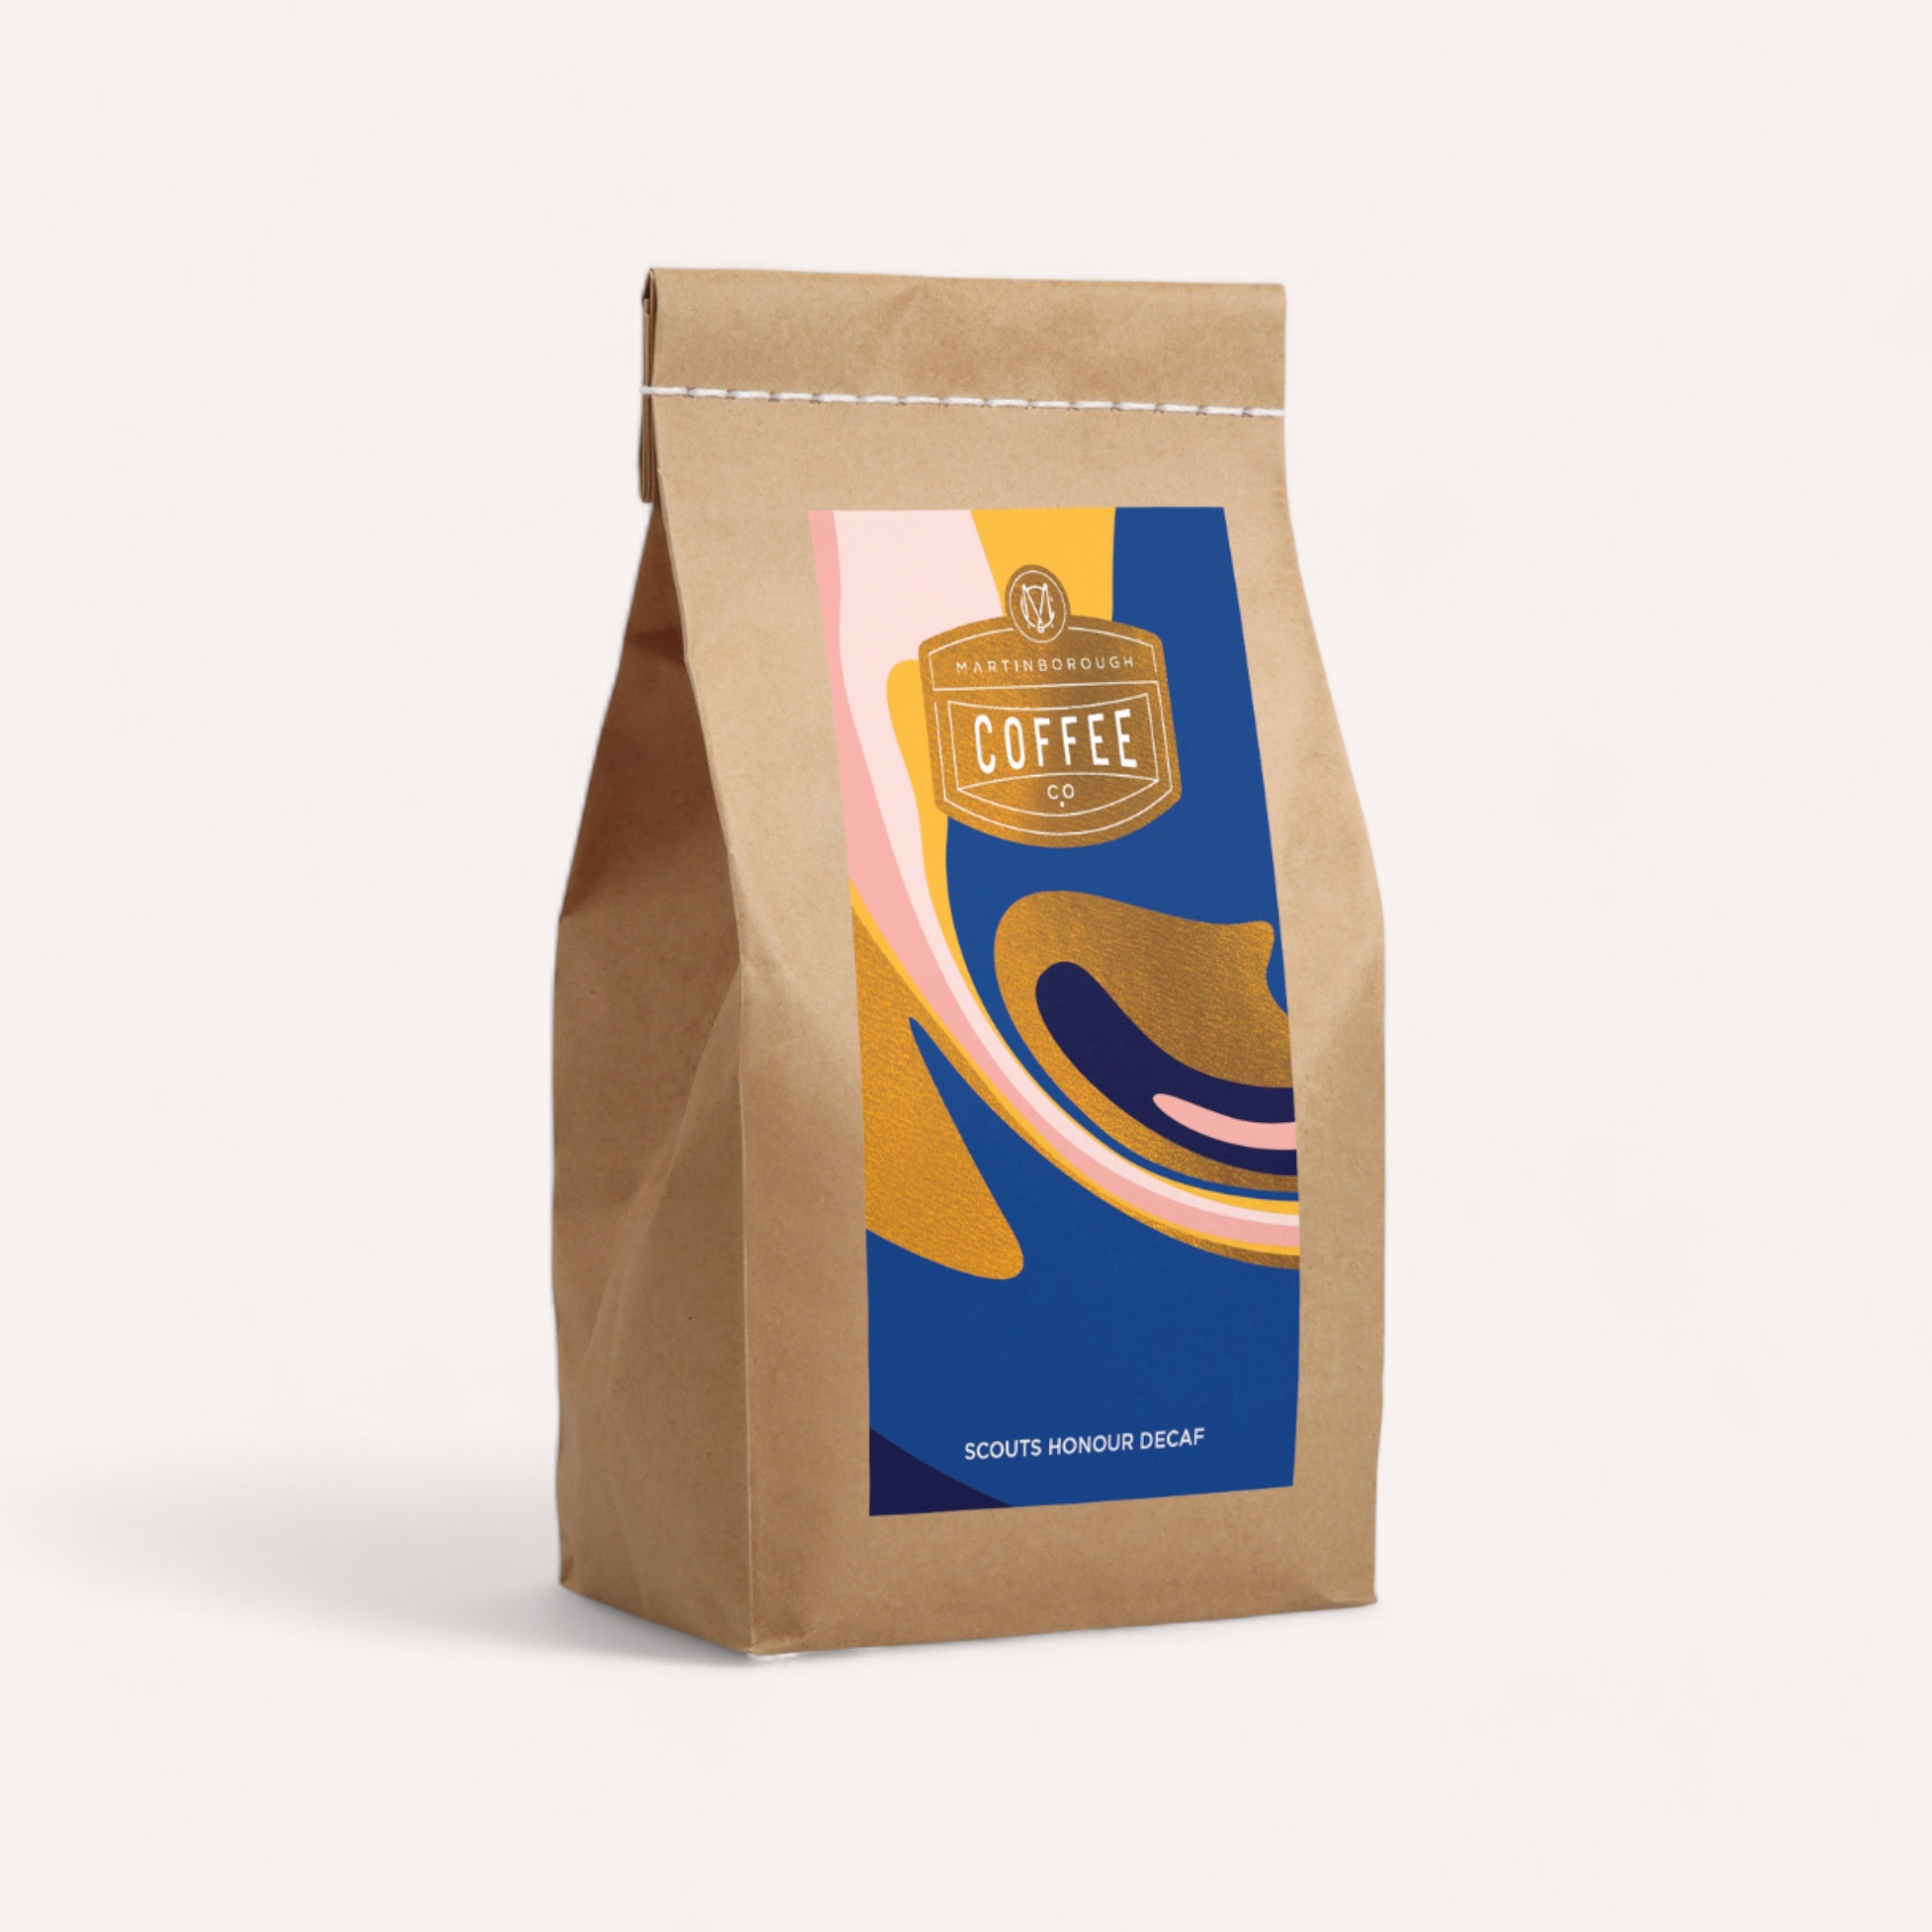 A neatly sealed brown craft paper coffee bag with a vibrant, modern label design stands against a white background, labeled as Scouts Honour Decaf Coffee by Martinborough Coffee Company for a medium-bodied coffee.